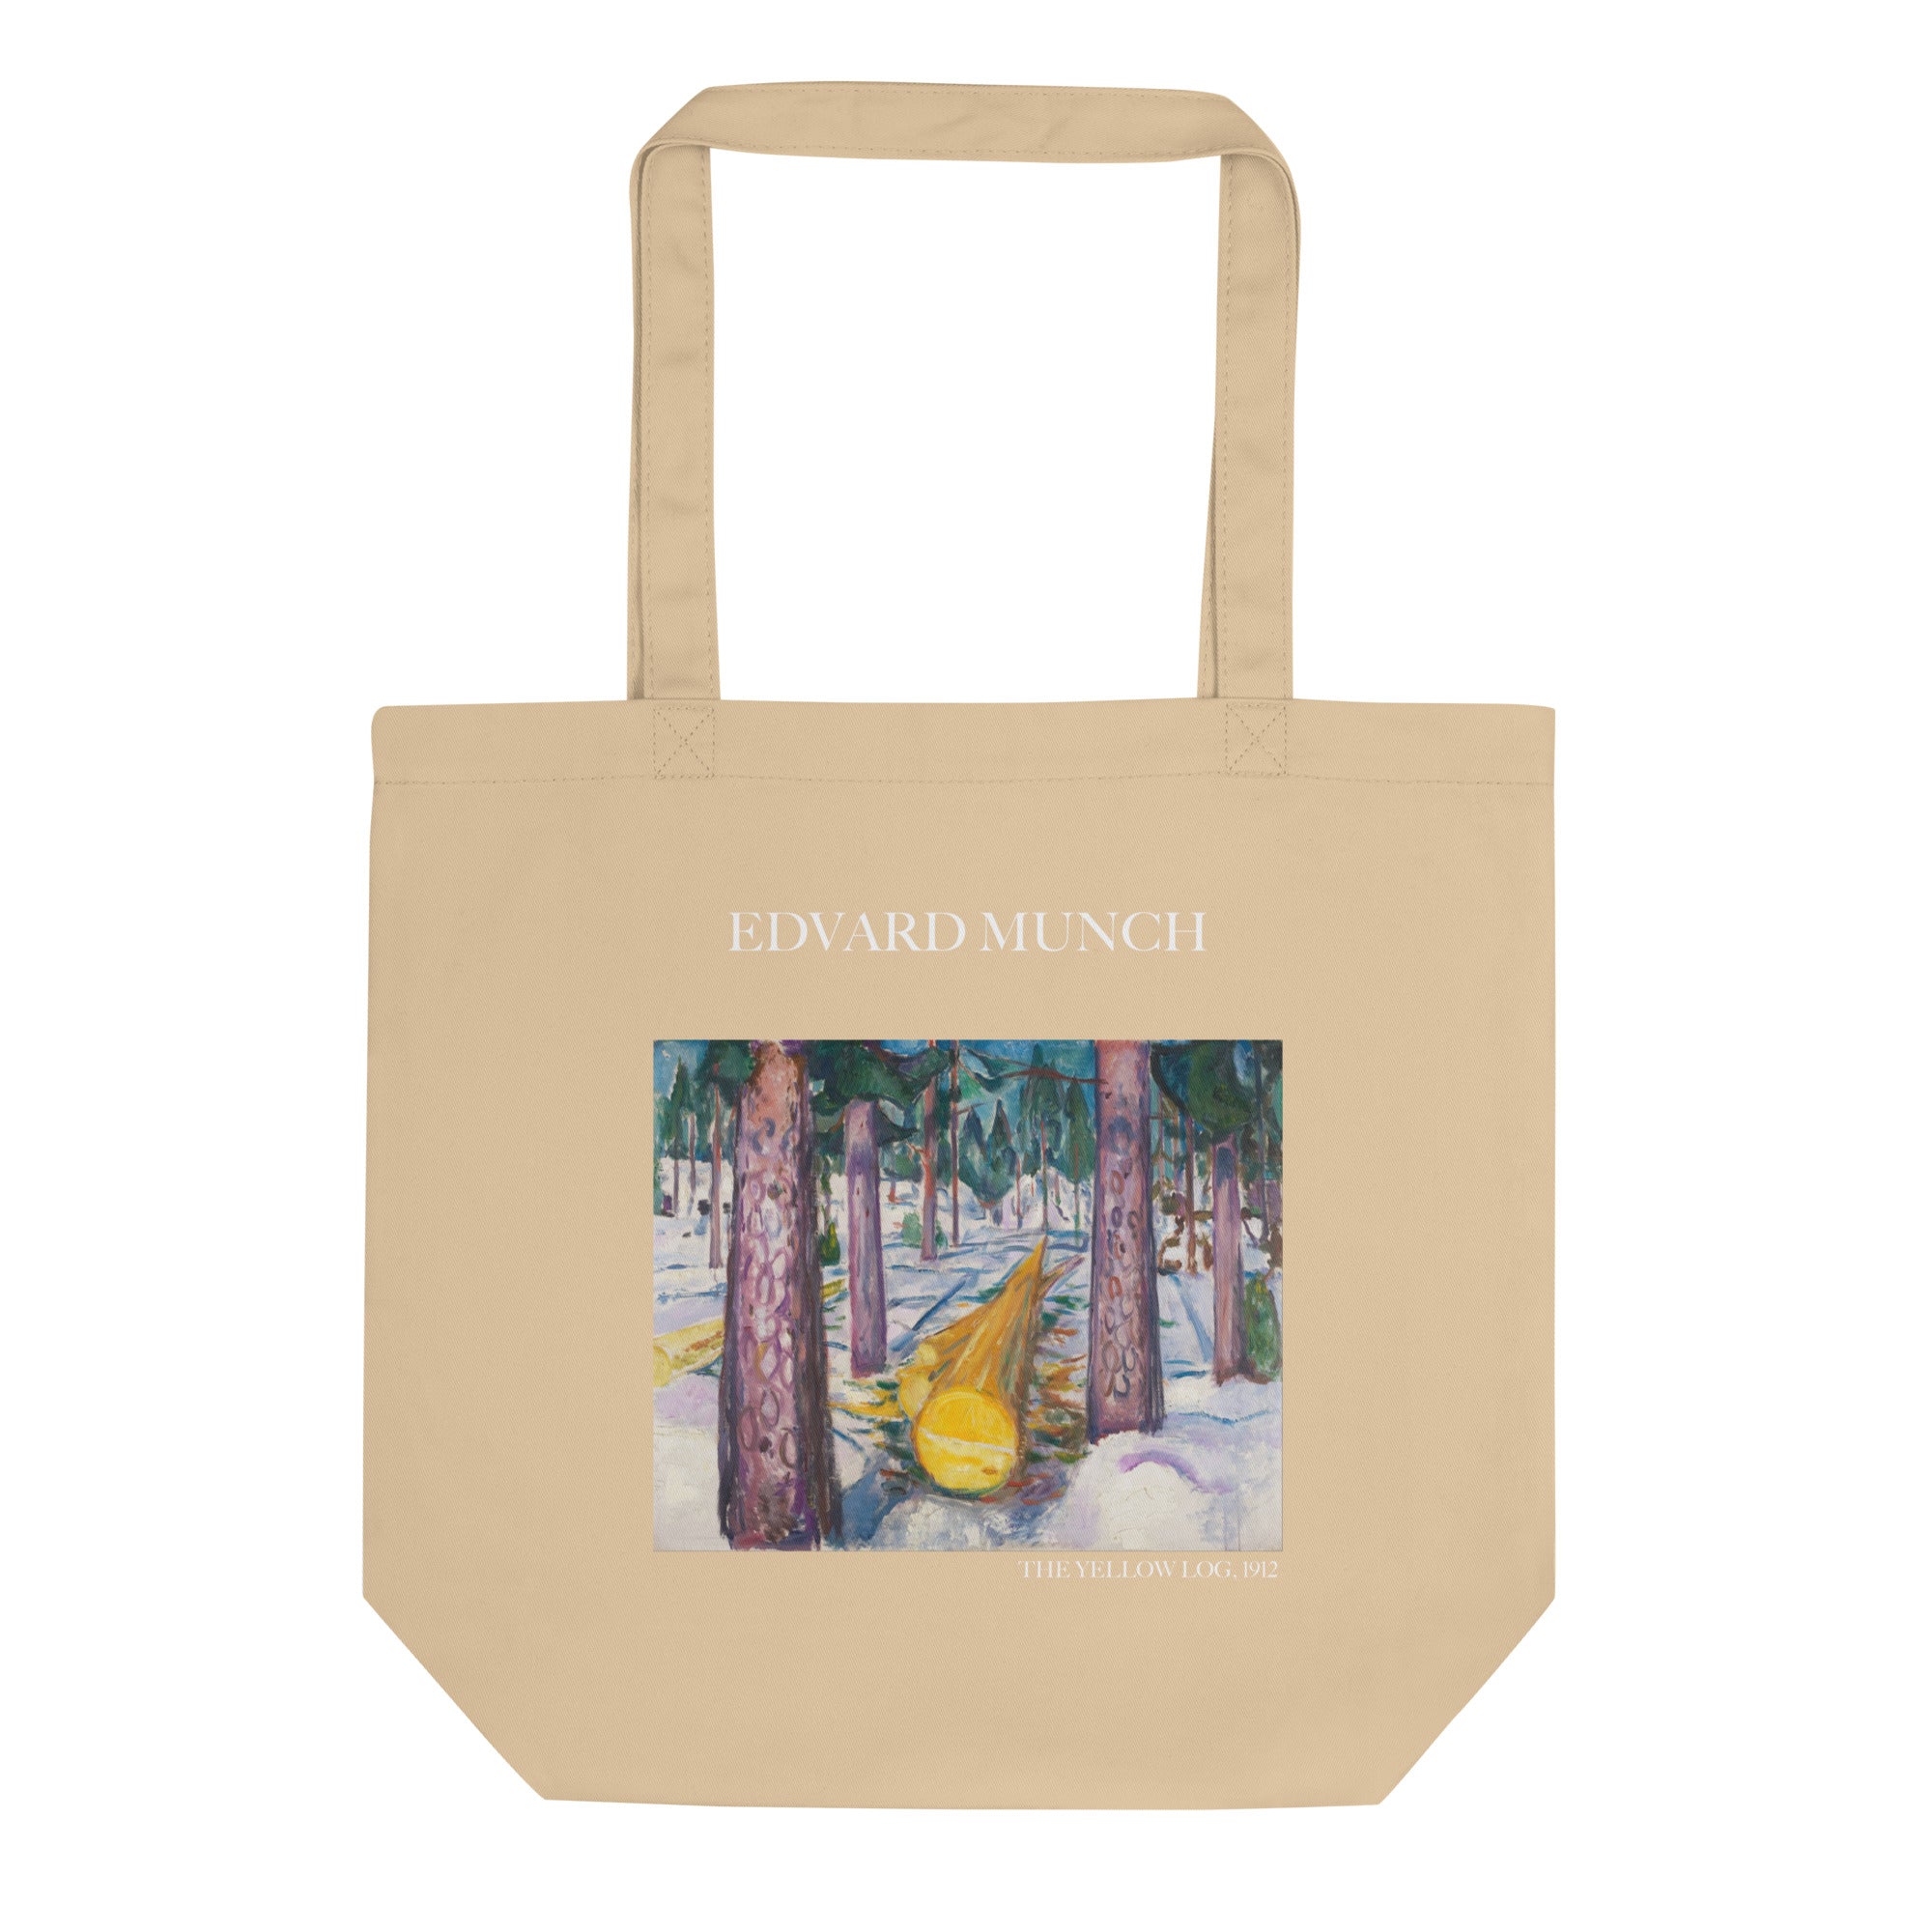 Edvard Munch 'The Yellow Log' Famous Painting Totebag | Eco Friendly Art Tote Bag